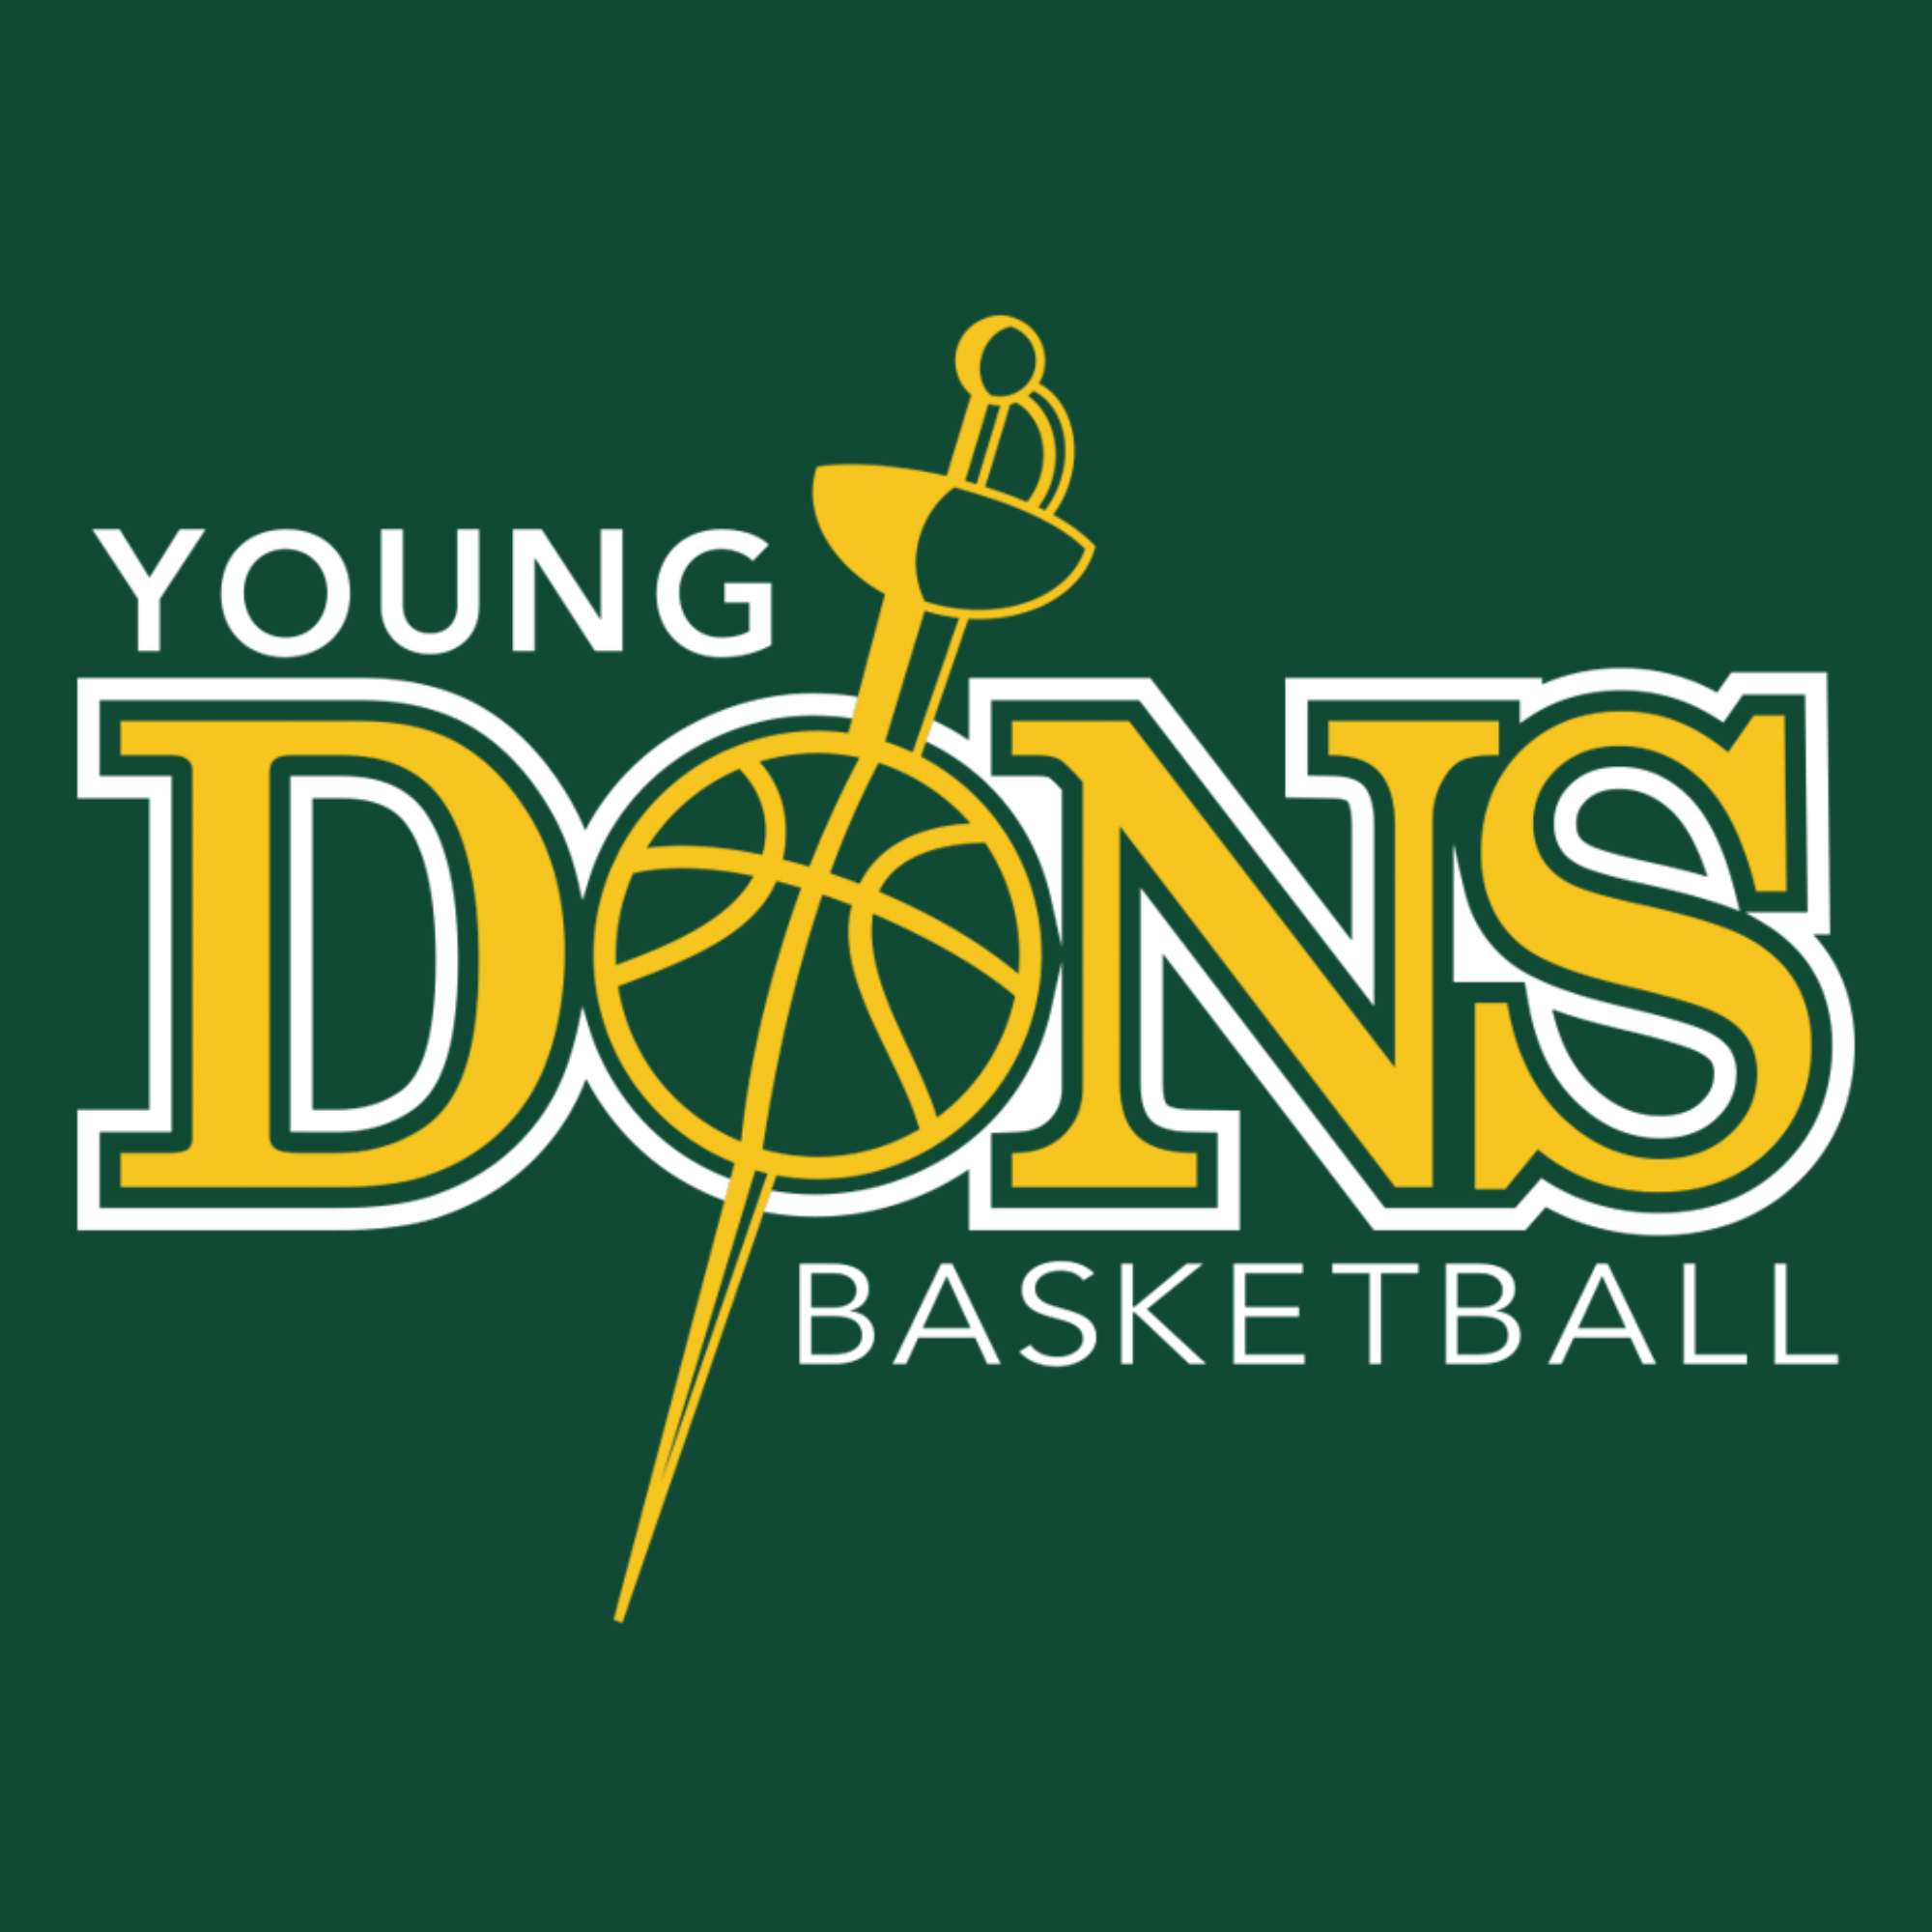 The official logo of Young Dons